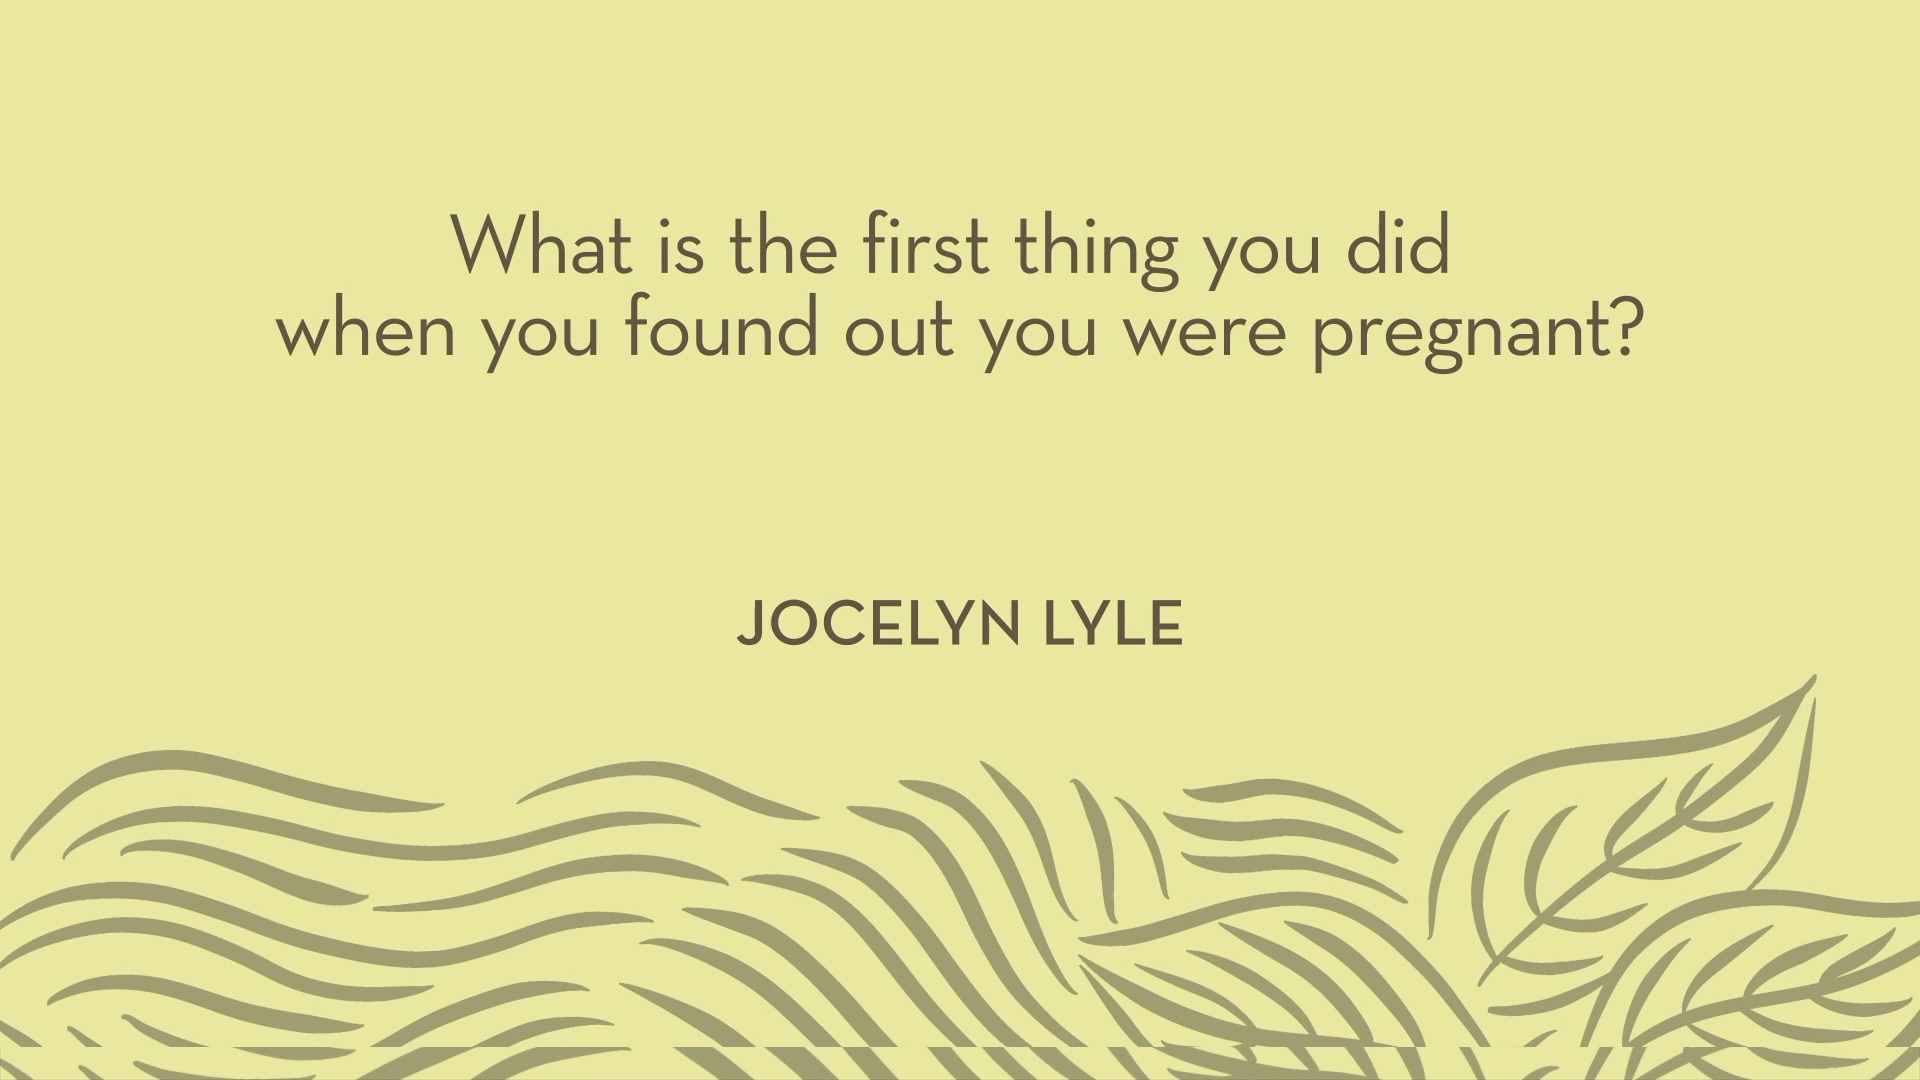 Jocelyn Lyle | What is the first thing you did when you found out you were pregnant?